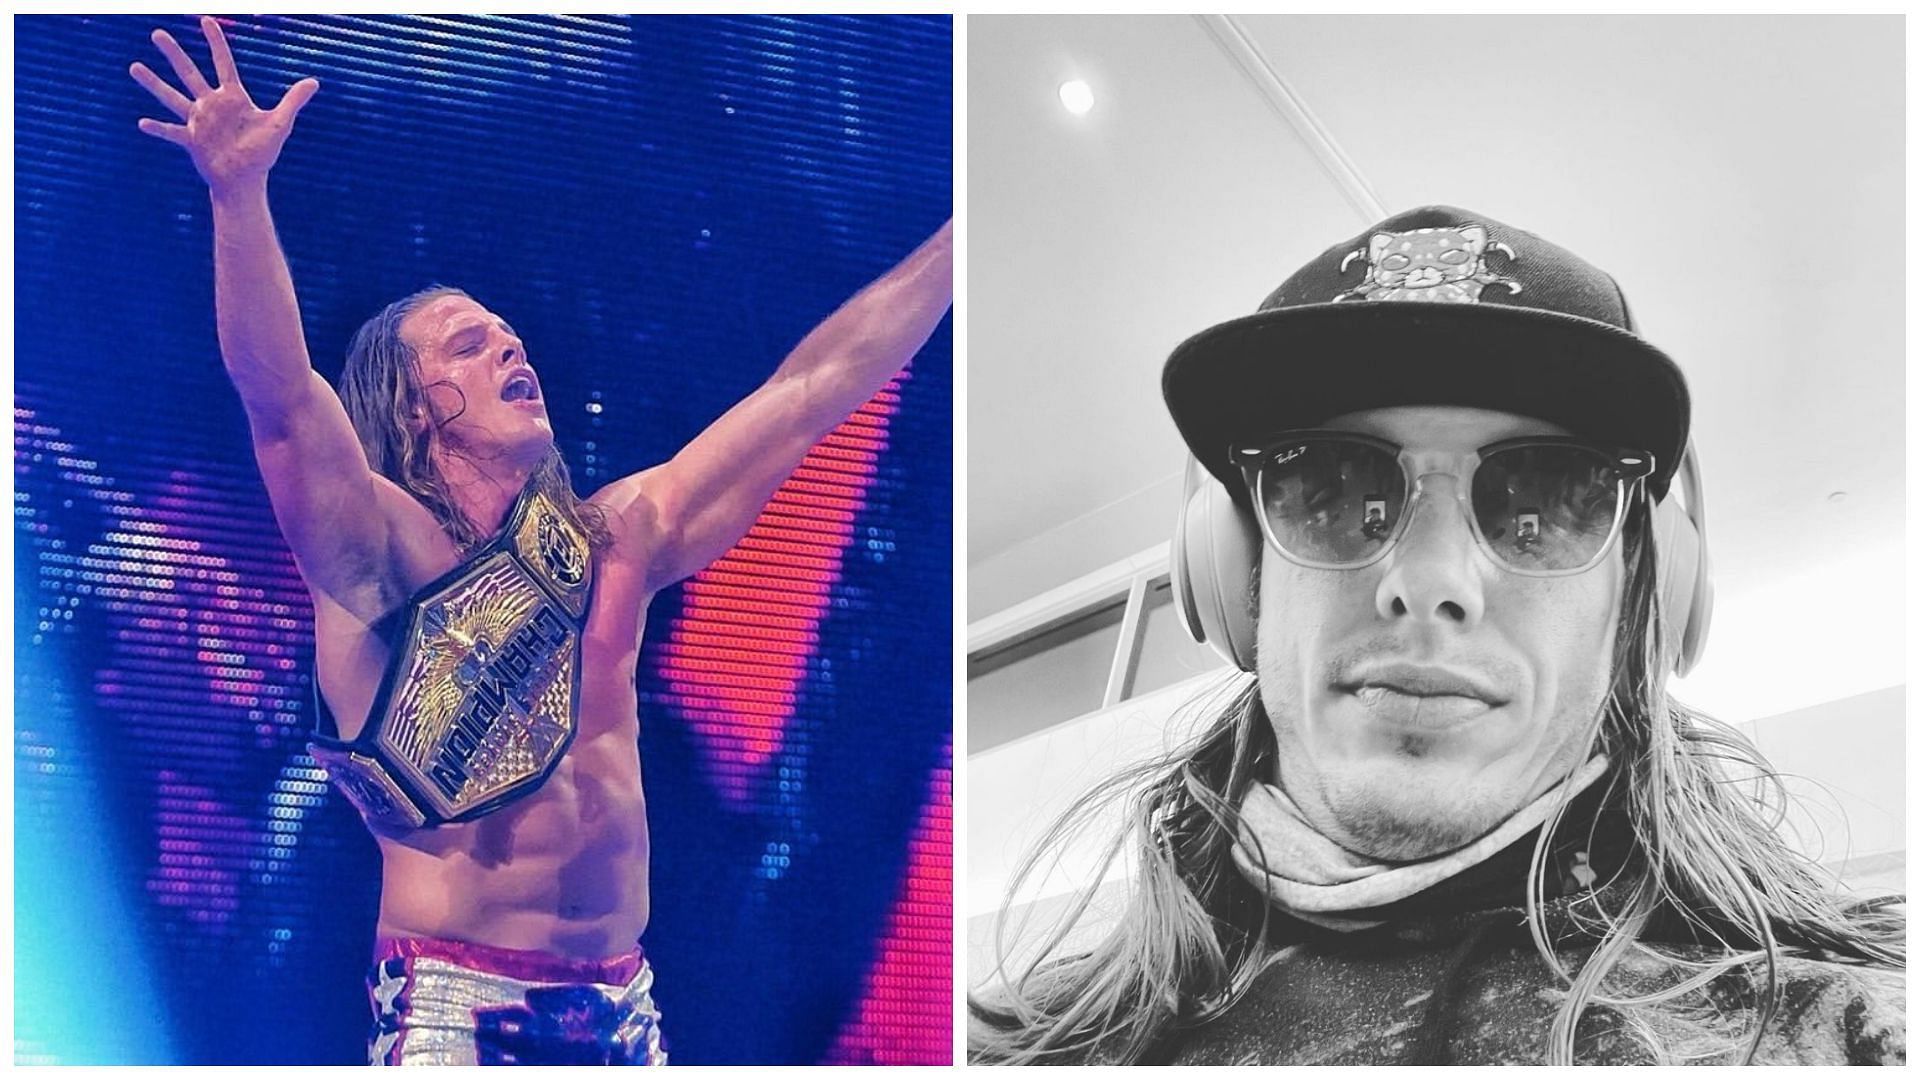 Matt Riddle is a former WWE United States Champion.